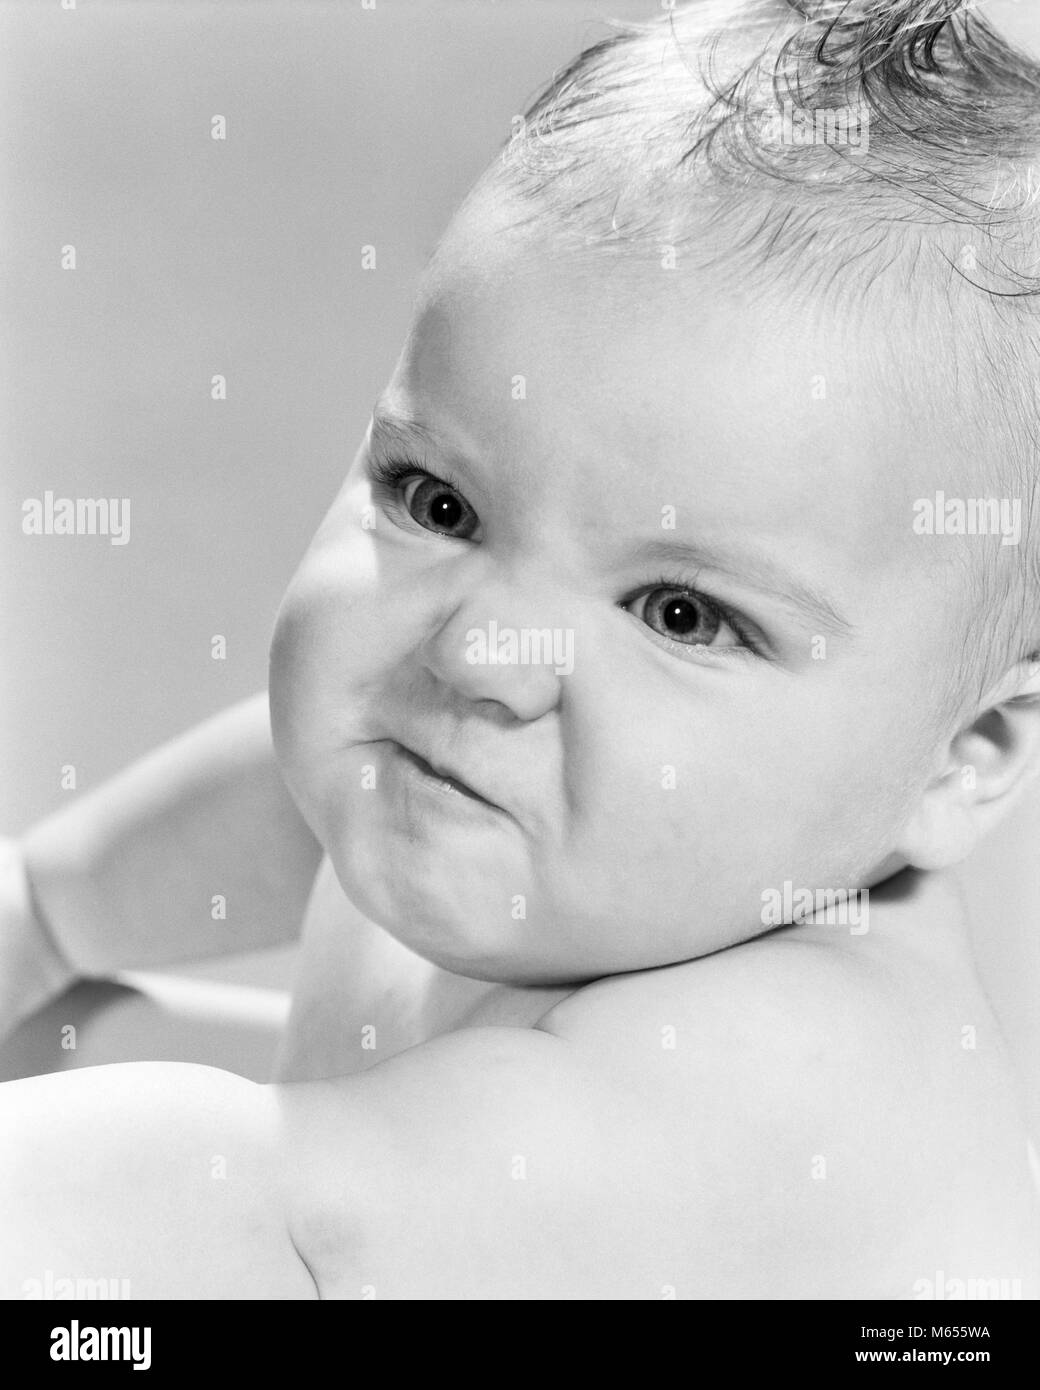 1950s 1960s BABY GIRL LOOKING ANGRY MAD MEAN - b12636 HAR001 HARS EMOTIONS INTENSE JUVENILES RESPONSE TOUGH AGGRESSION ATTITUDE B&W BABY GIRL BLACK AND WHITE CAUCASIAN ETHNICITY DEMEANOR HOSTILE OLD FASHIONED PERCEIVED PROVOCATION WRATH Stock Photo